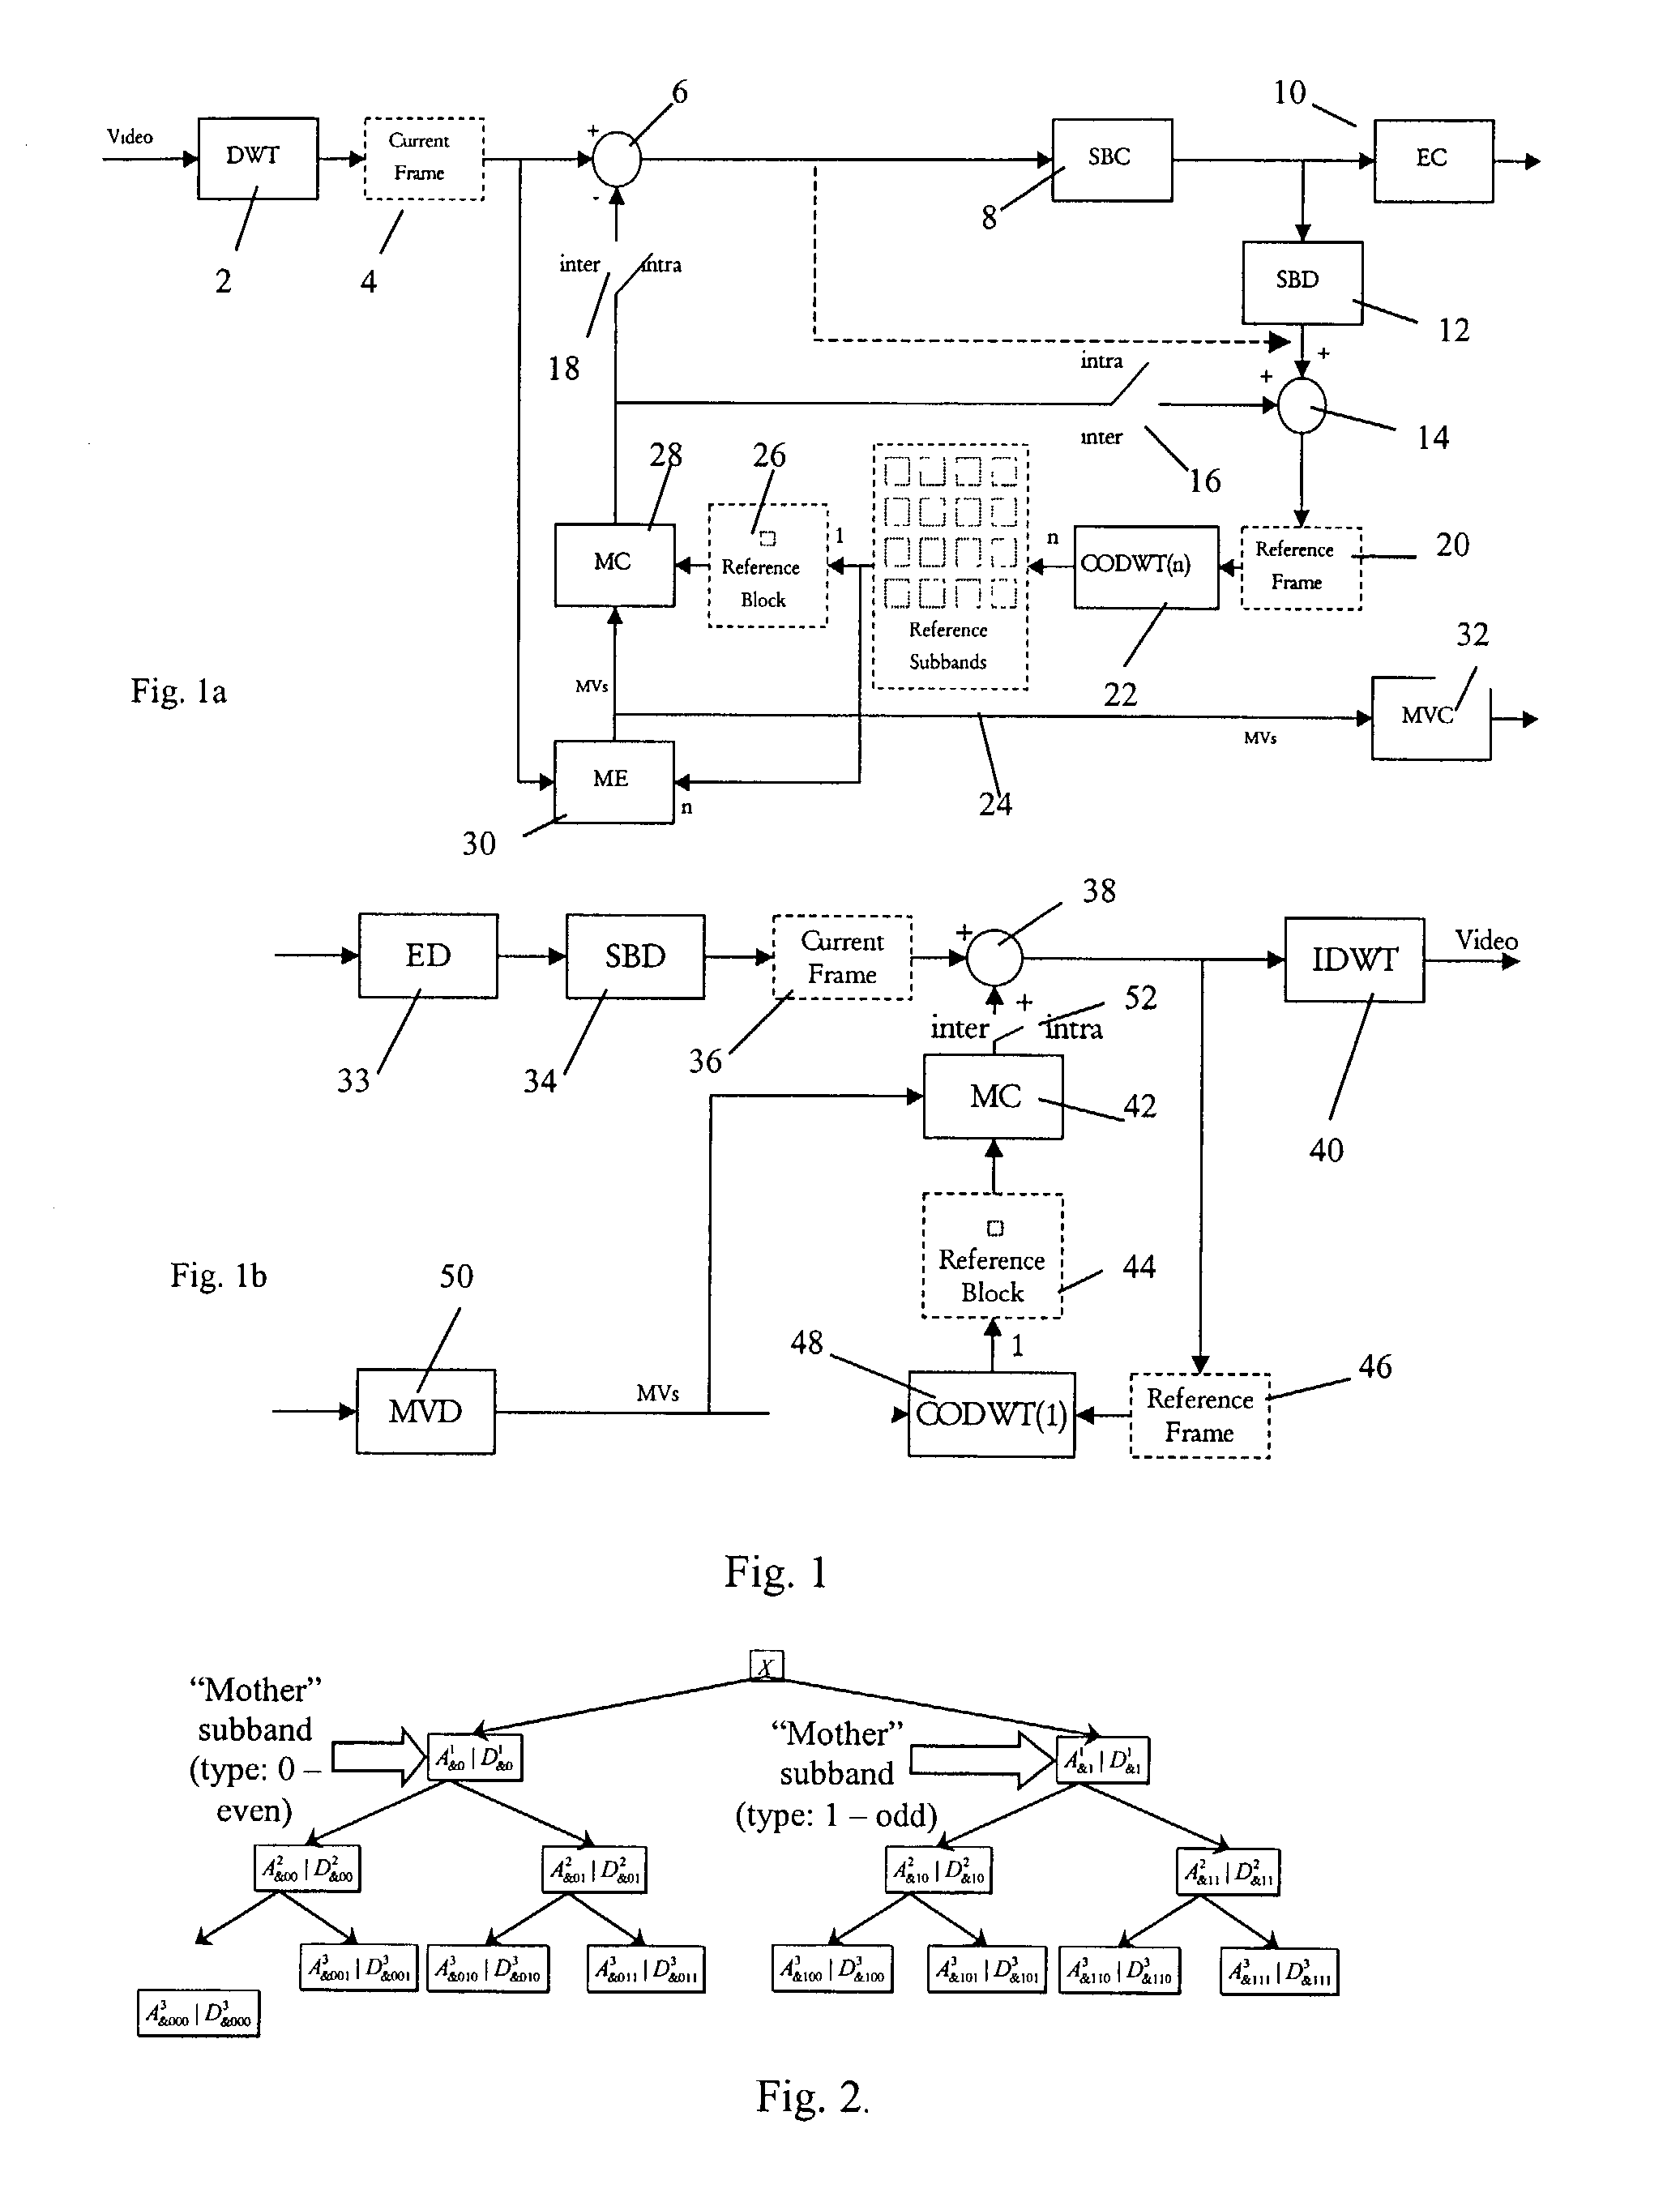 Method and apparatus for subband encoding and decoding